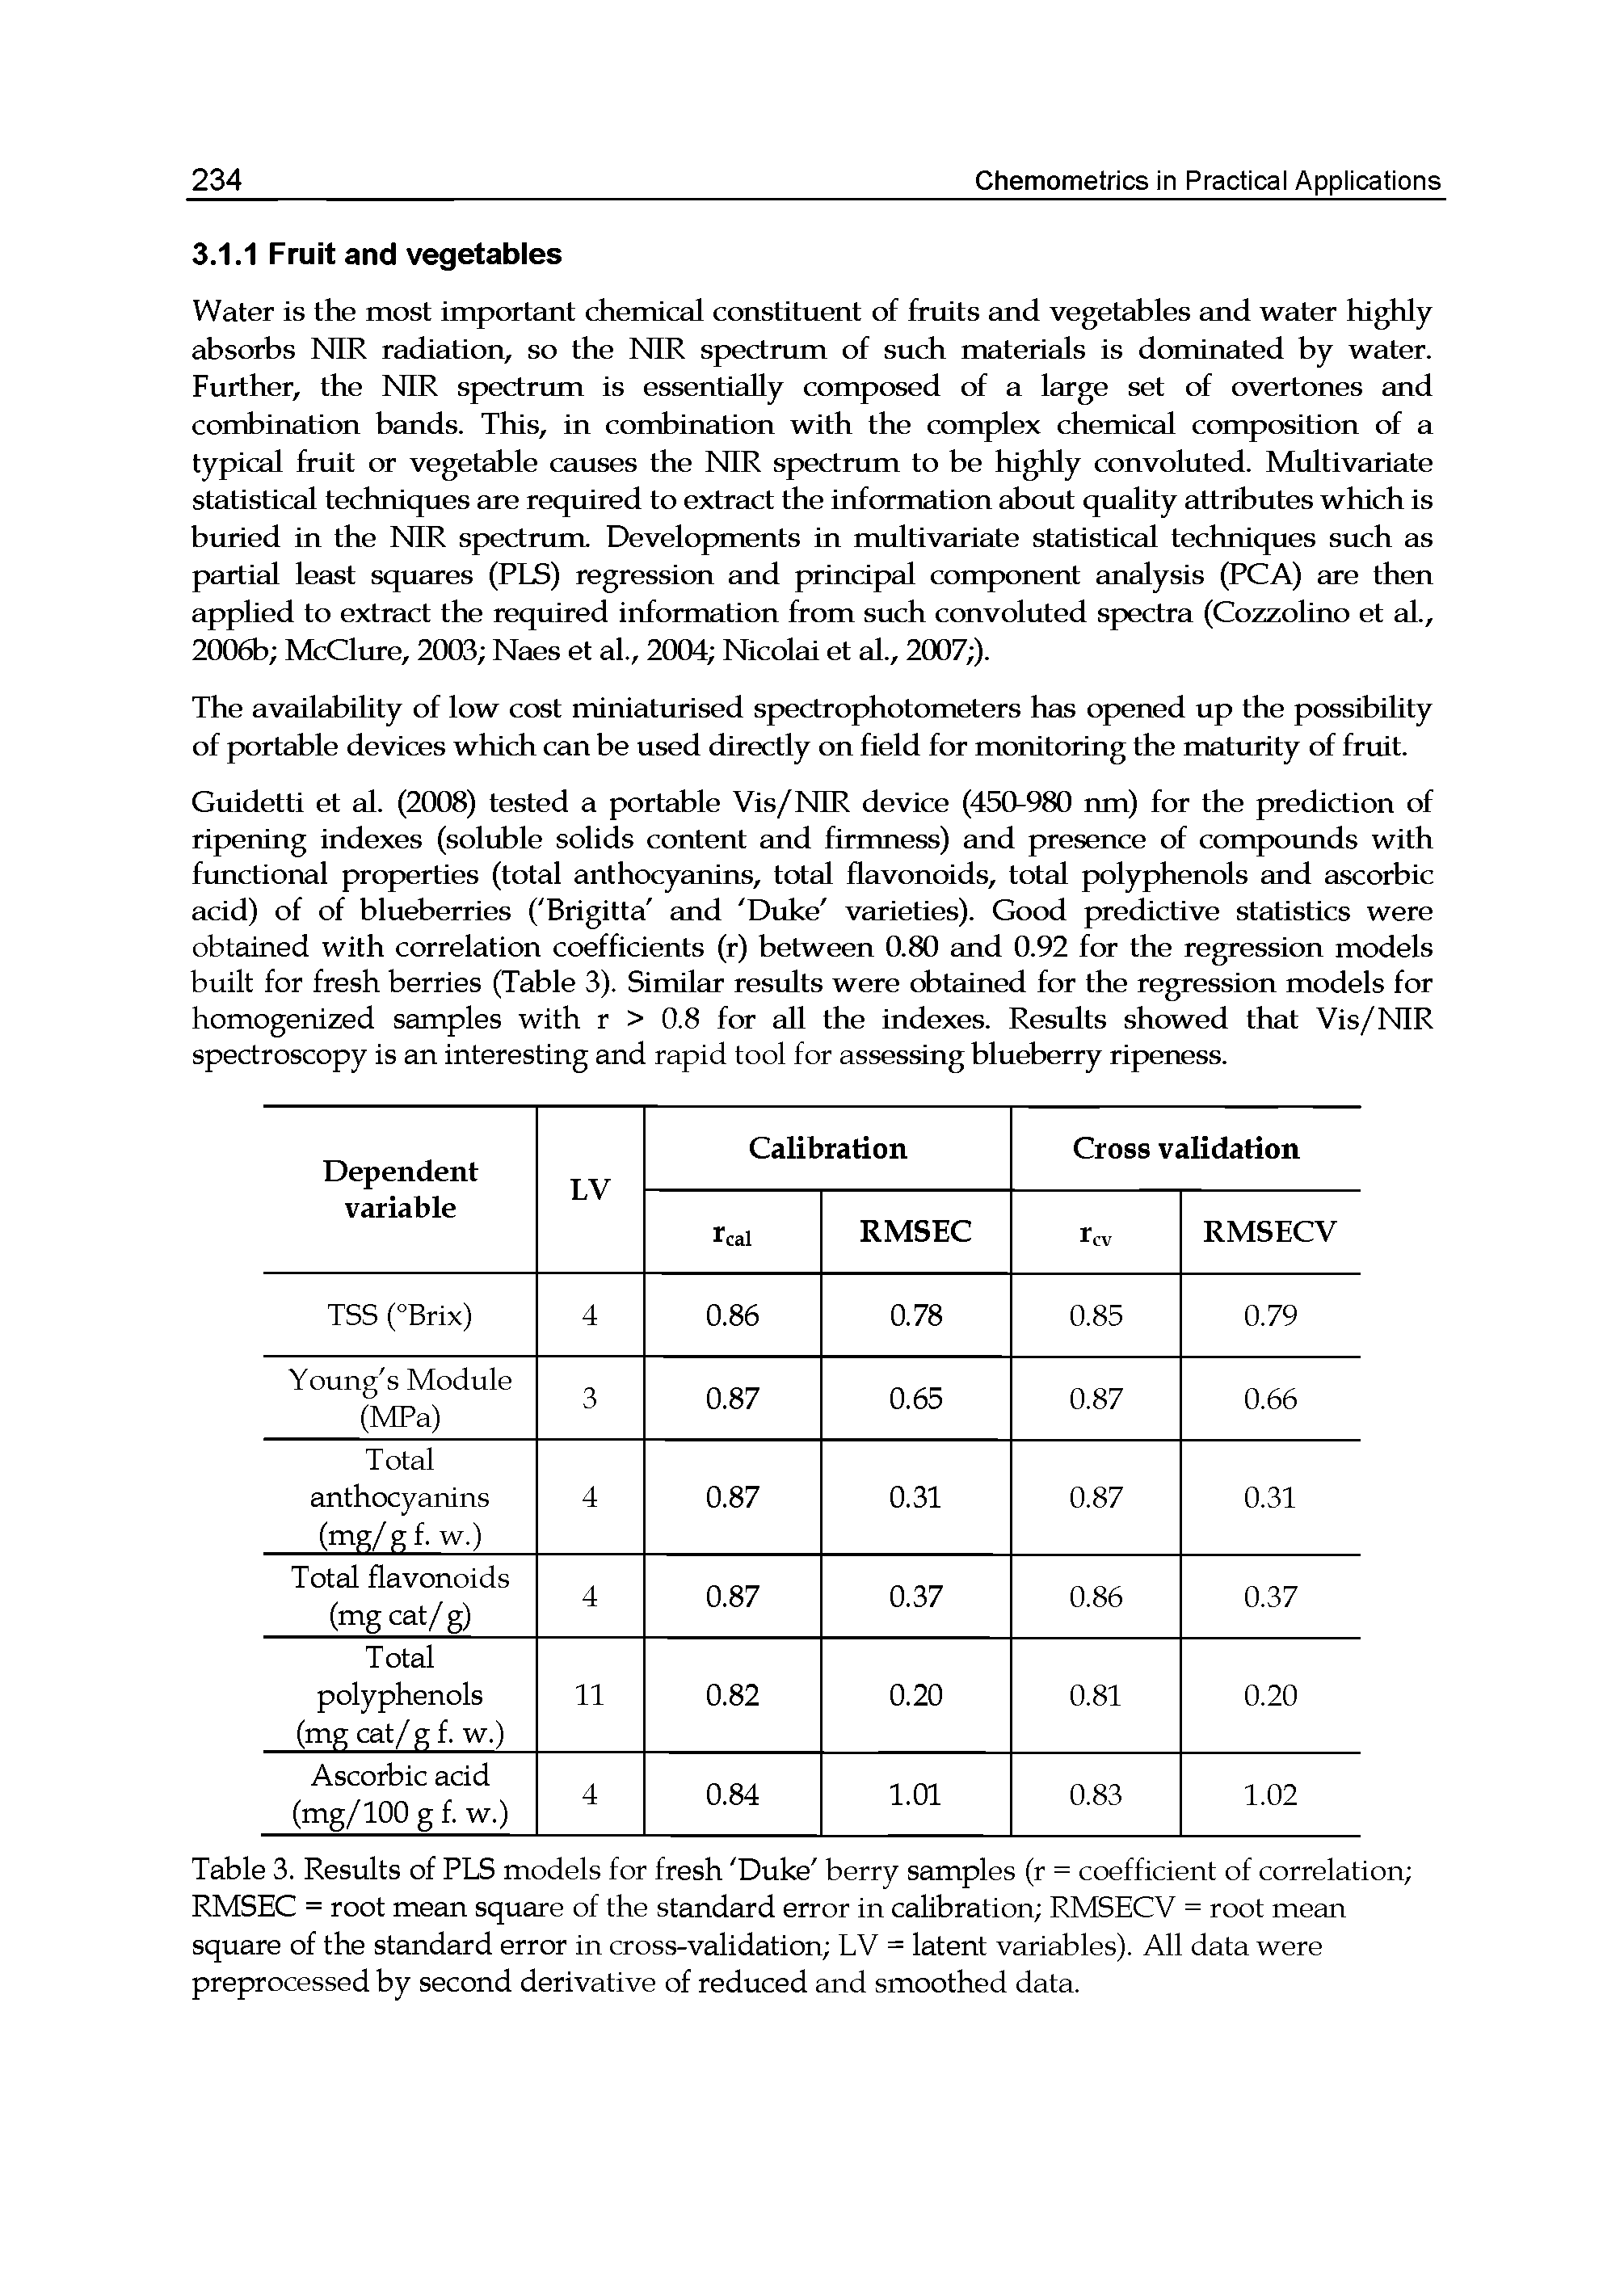 Table 3. Results of PLS models for fresh Duke berry samples (r = coefficient of correlation RMSEC = root mean square of the standard error in calibration RMSEGV = root mean square of the standard error in cross-validation LV = latent variables). All data were preprocessed by second derivative of reduced and smoothed data.